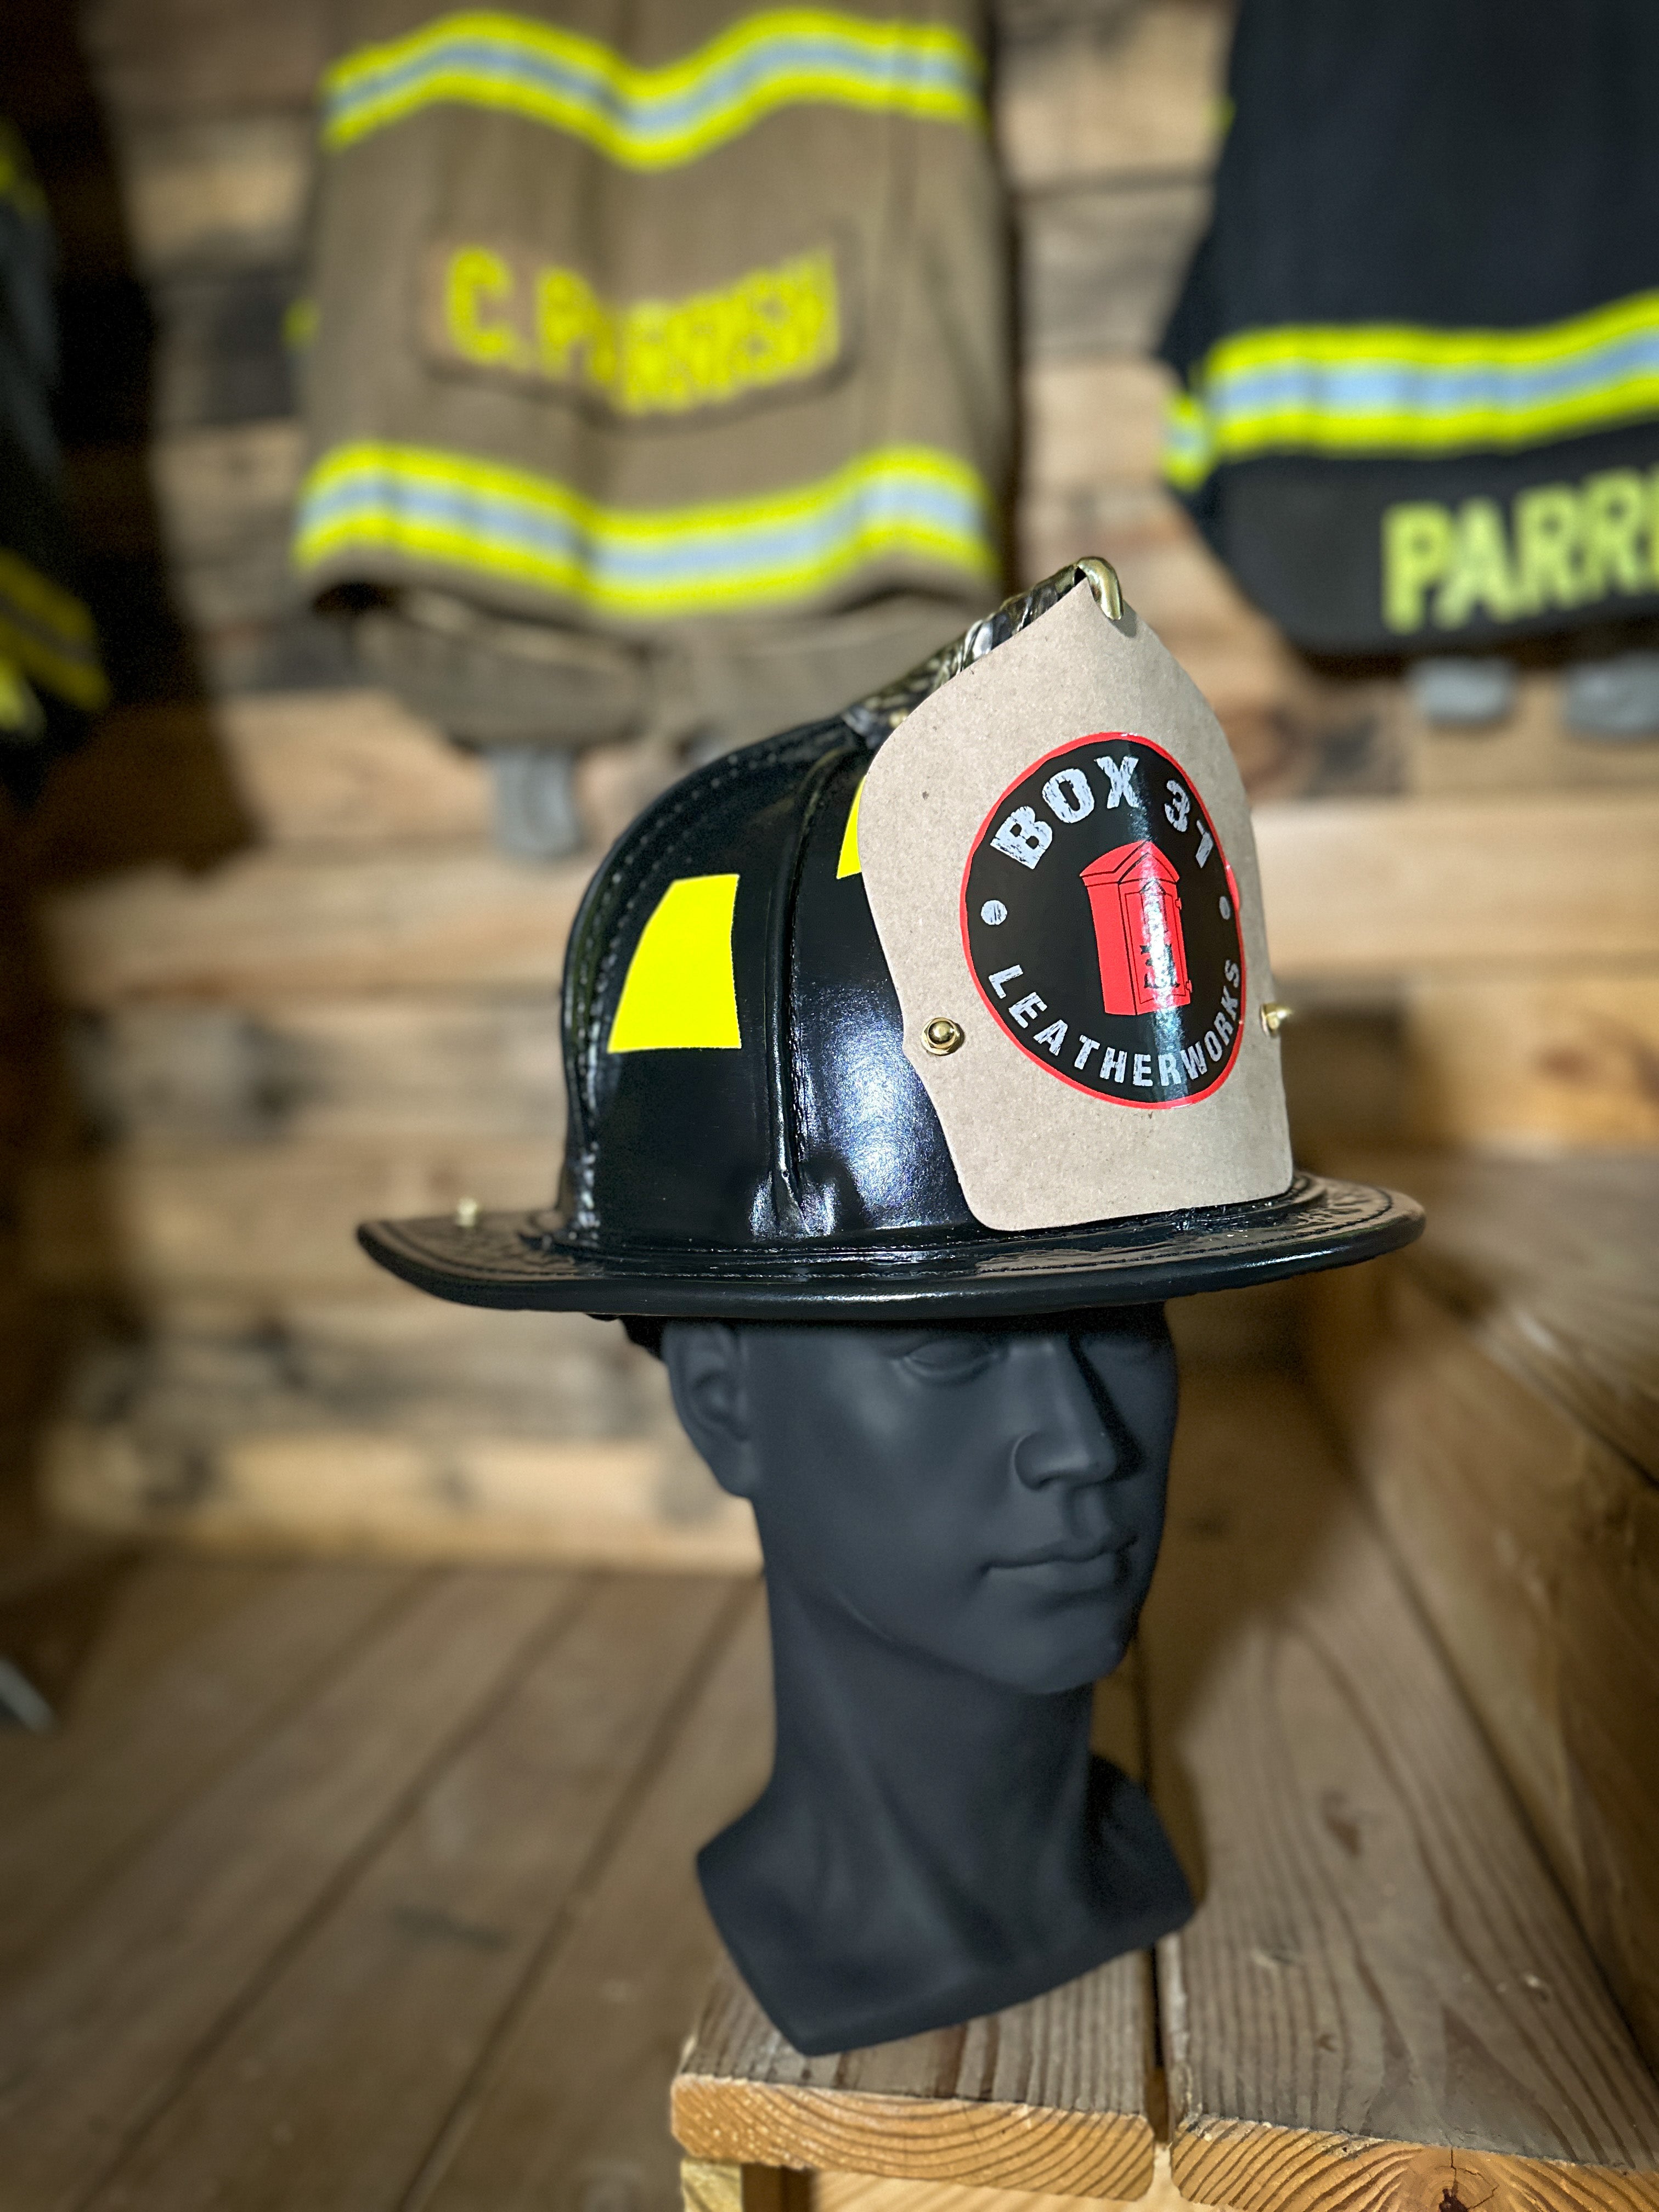 Phenix TL-2  Leather Helmet - Black Phenix Bend (NFPA) with ESS Goggles and Deluxe Leather Comfort Package